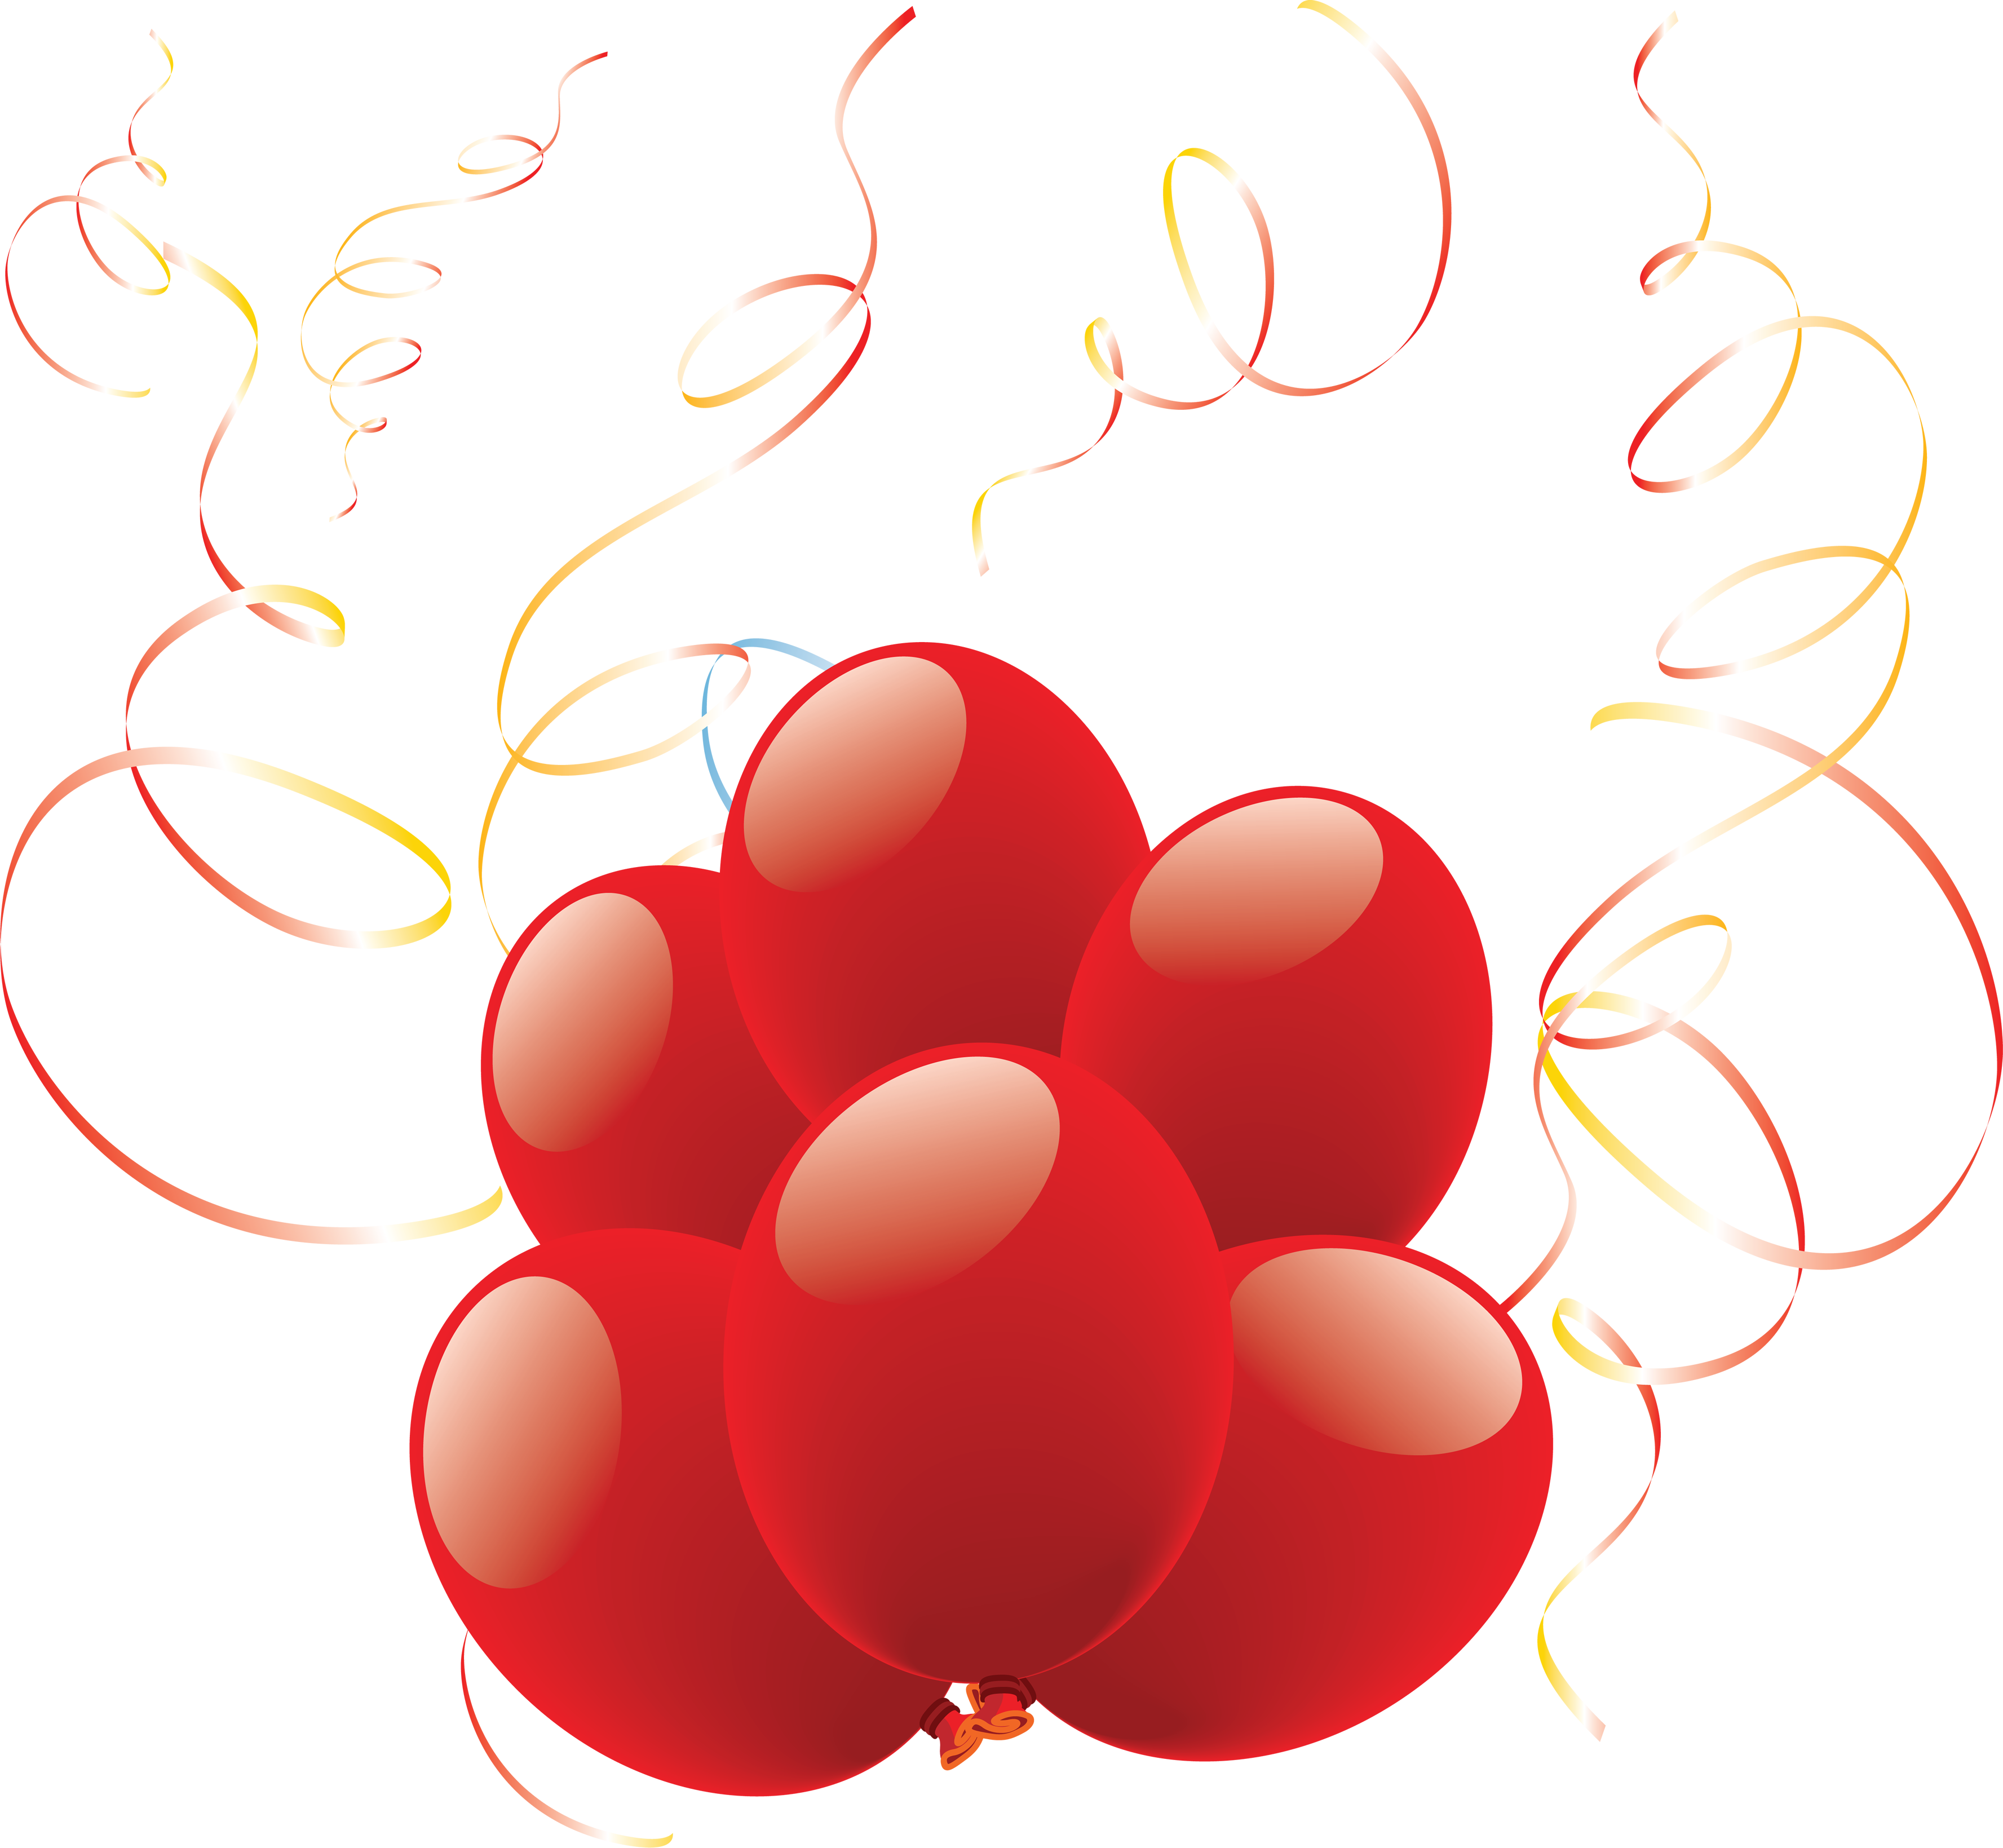 Heart Shaped Balloons with Ribbon PNG Image